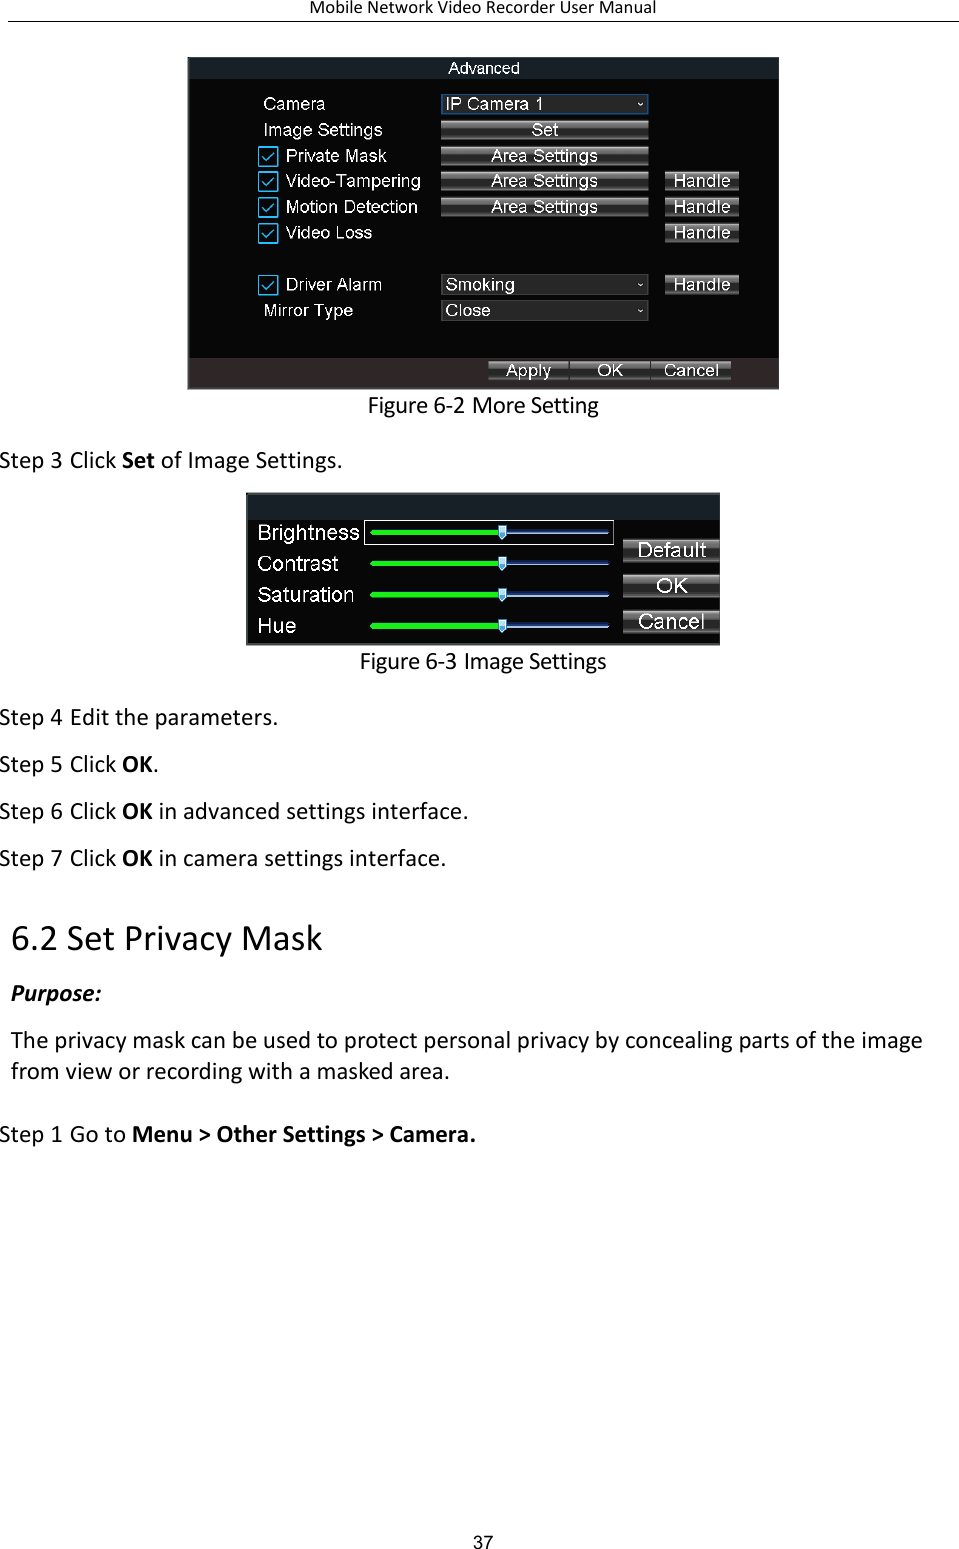 Mobile Network Video Recorder User Manual 37  Figure 6-2 More Setting Step 3 Click Set of Image Settings.  Figure 6-3 Image Settings Step 4 Edit the parameters. Step 5 Click OK. Step 6 Click OK in advanced settings interface. Step 7 Click OK in camera settings interface. 6.2 Set Privacy Mask Purpose: The privacy mask can be used to protect personal privacy by concealing parts of the image from view or recording with a masked area. Step 1 Go to Menu &gt; Other Settings &gt; Camera. 